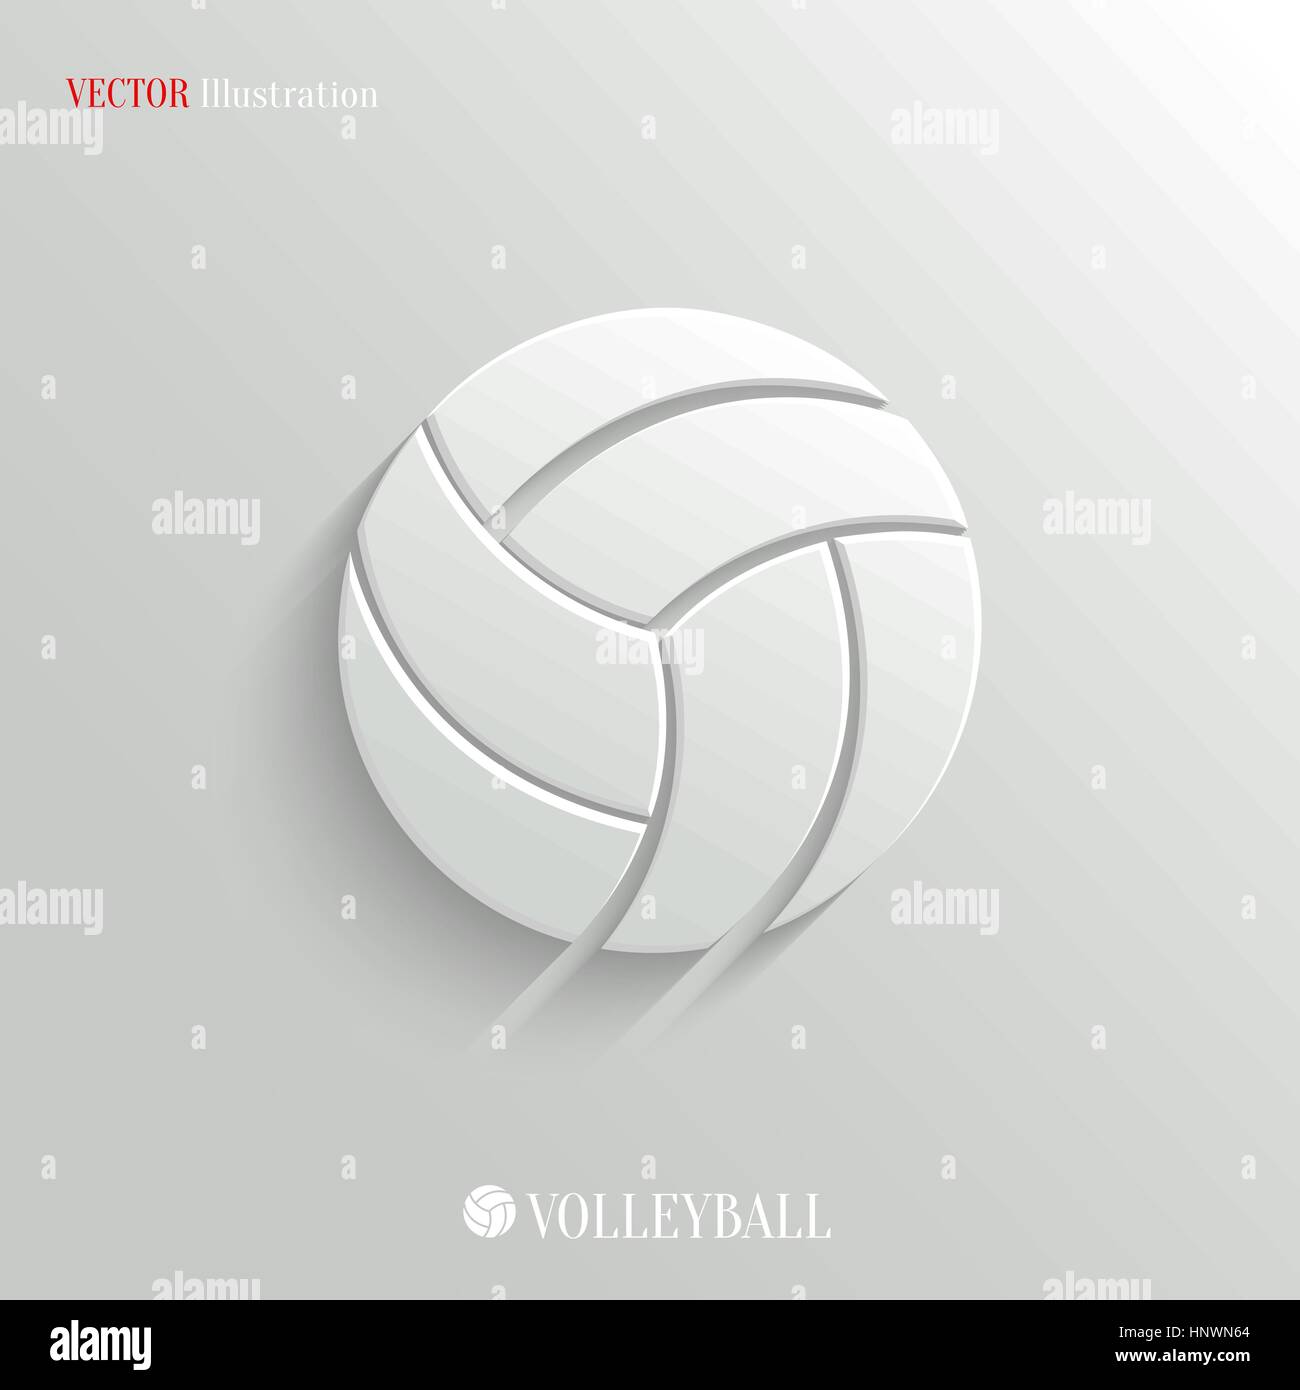 Volleyball icon - vector web illustration, easy paste to any background Stock Vector